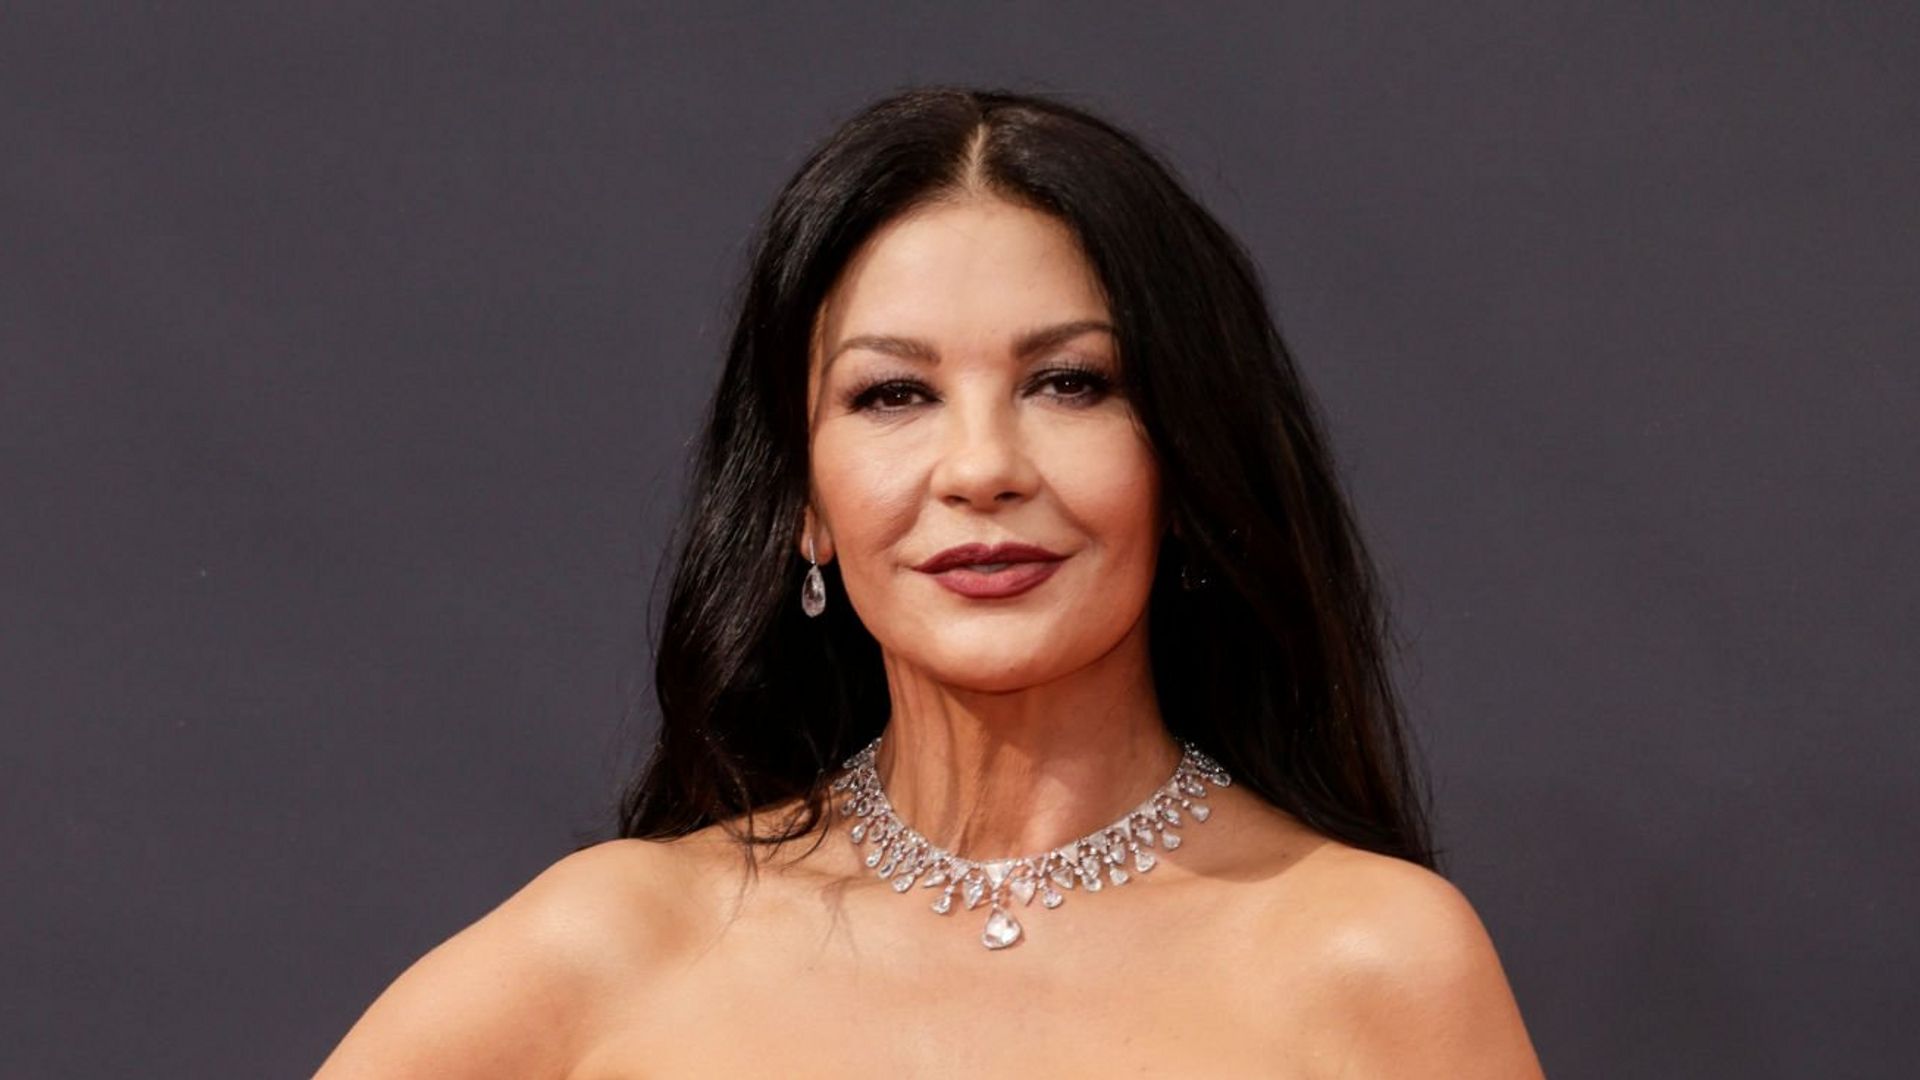 Catherine Zeta-Jones attends the 73RD EMMY AWARDS on Sunday, Sept. 19 on the CBS Television Network and available to stream live and on demand on Paramount+